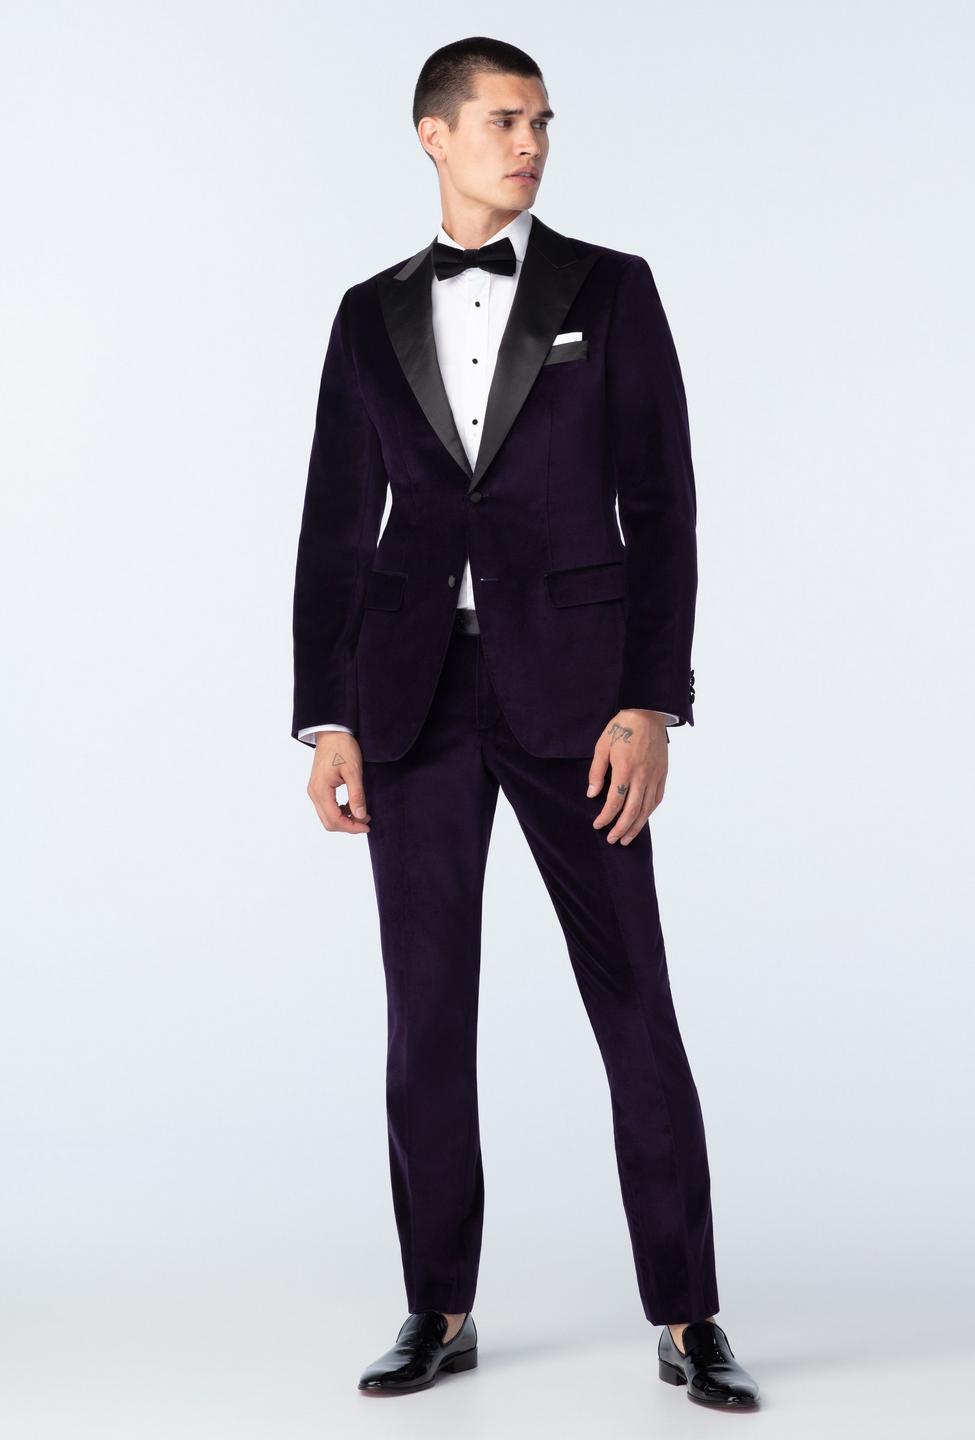 Purple suit - Harford Solid Design from Tuxedo Indochino Collection